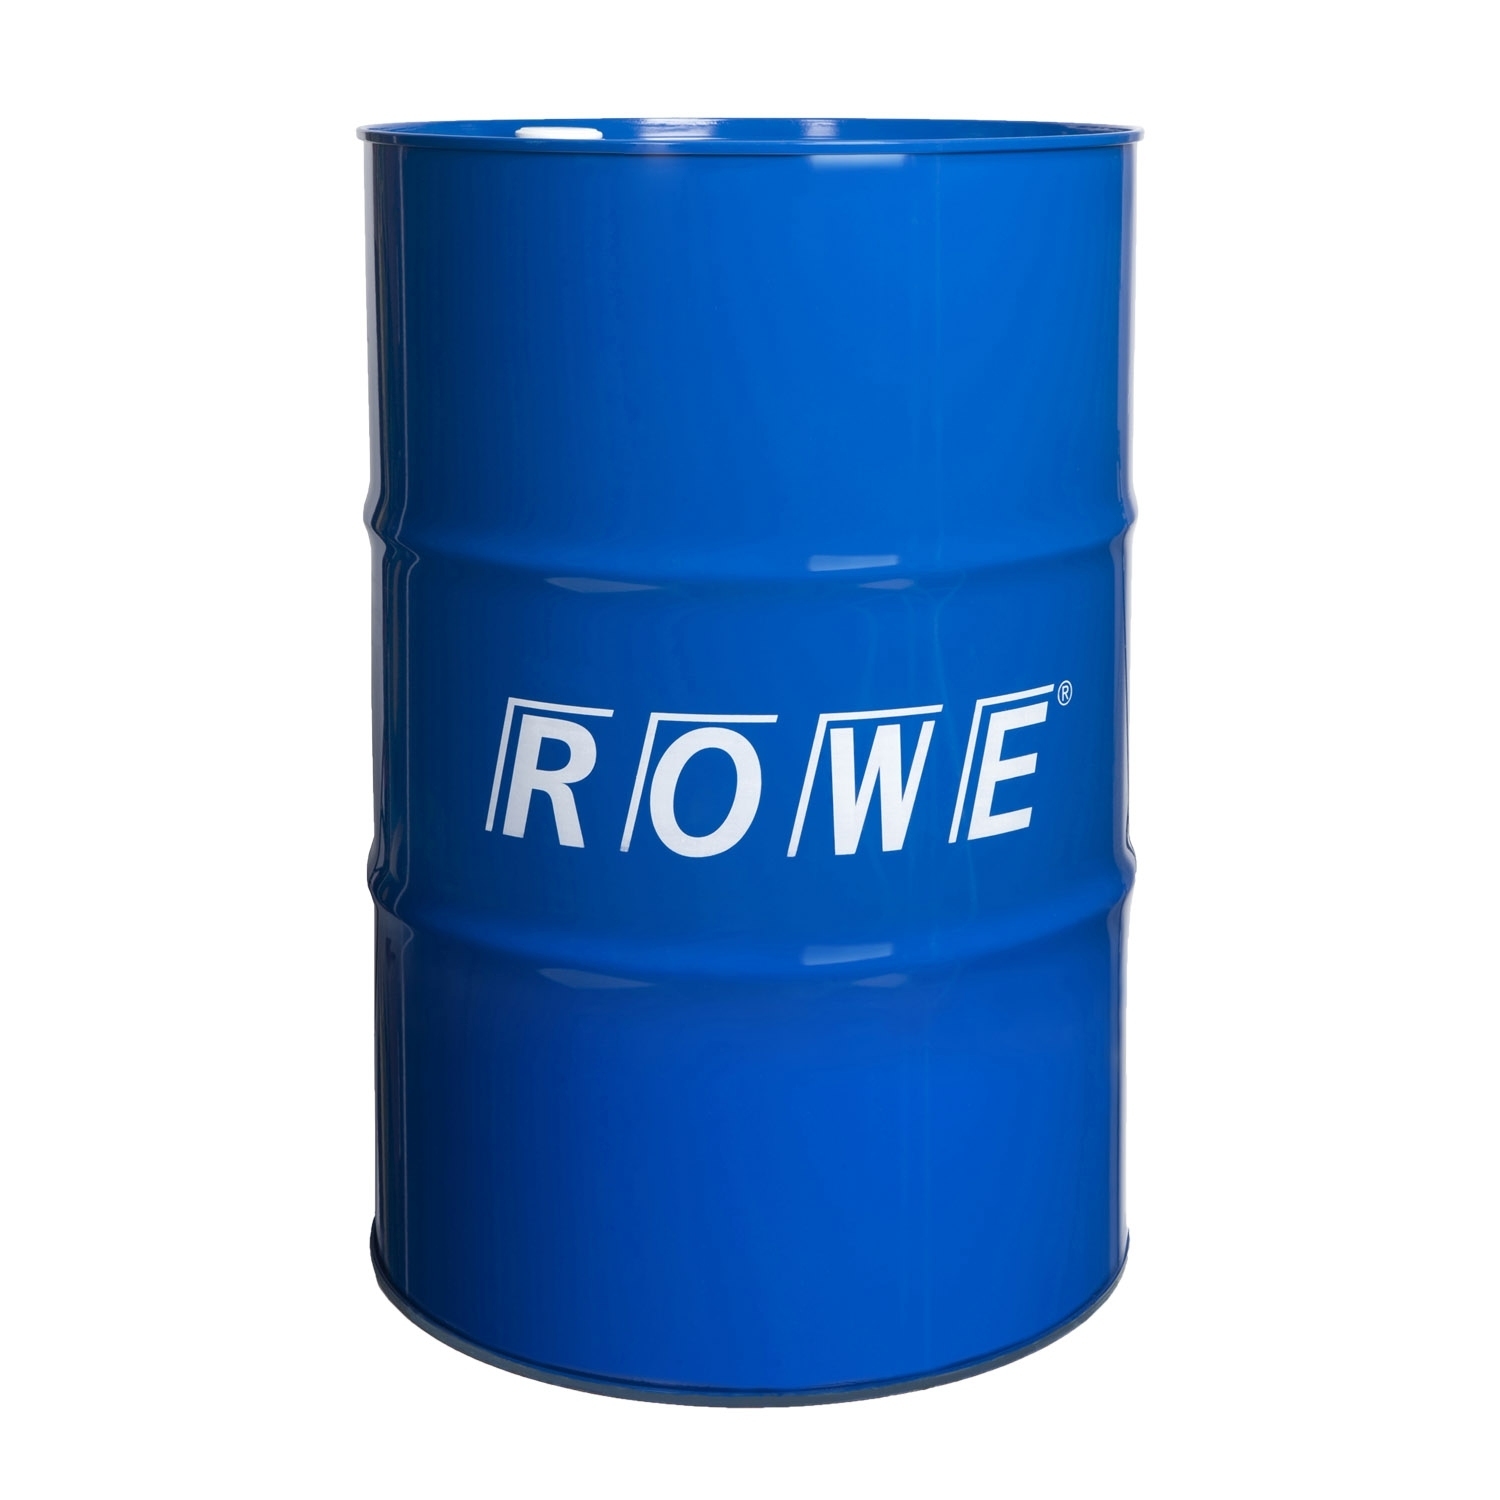 Rowe atf. Hightec ATF 9006. Hightec Synt RS SAE 5w-30 HC. Hightec Synt RS SAE 5w-40 HC-D 60л. Rowe Hightec Synt RS SAE 5w-30 HC-Fo.